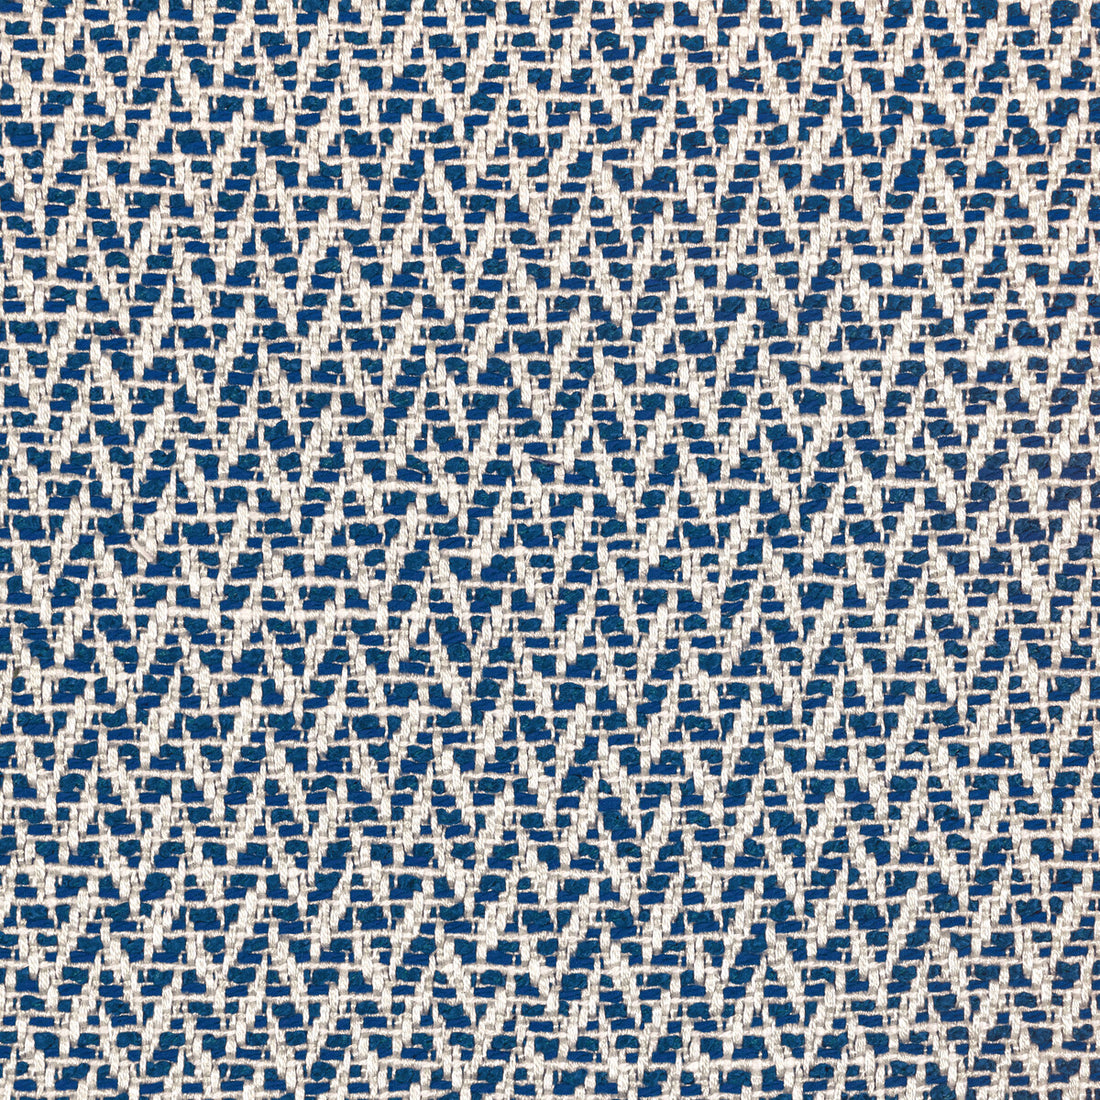 Kravet Design fabric in 36418-50 color - pattern 36418.50.0 - by Kravet Design in the Performance Crypton Home collection